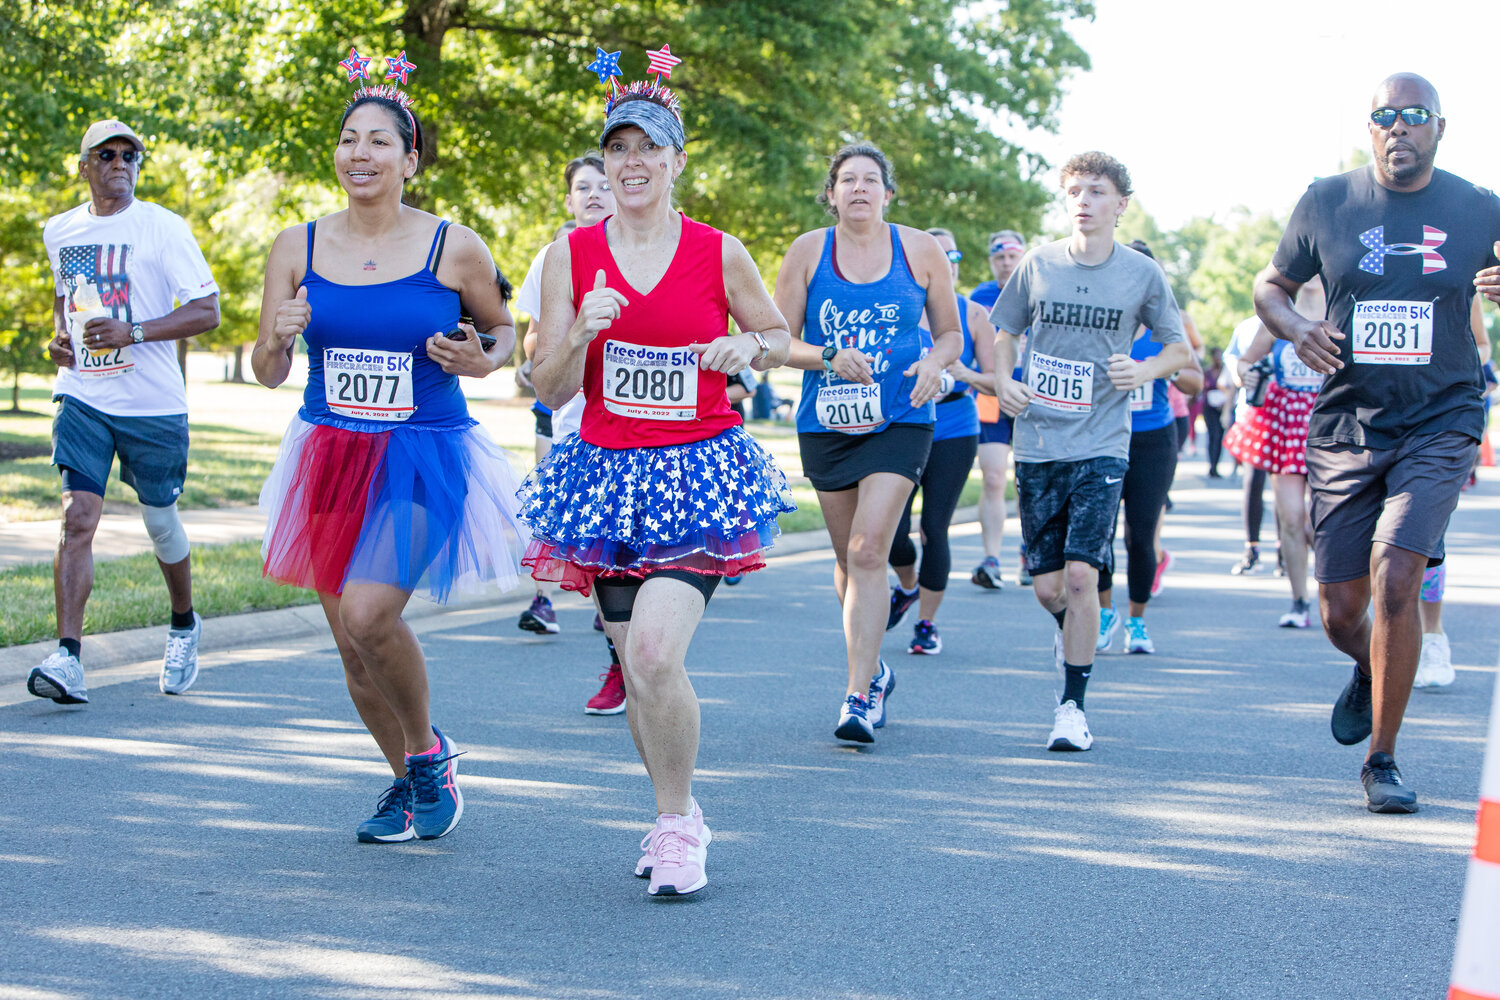 Runner celebrate the day wearing festive 4th of July costumes and accessories.